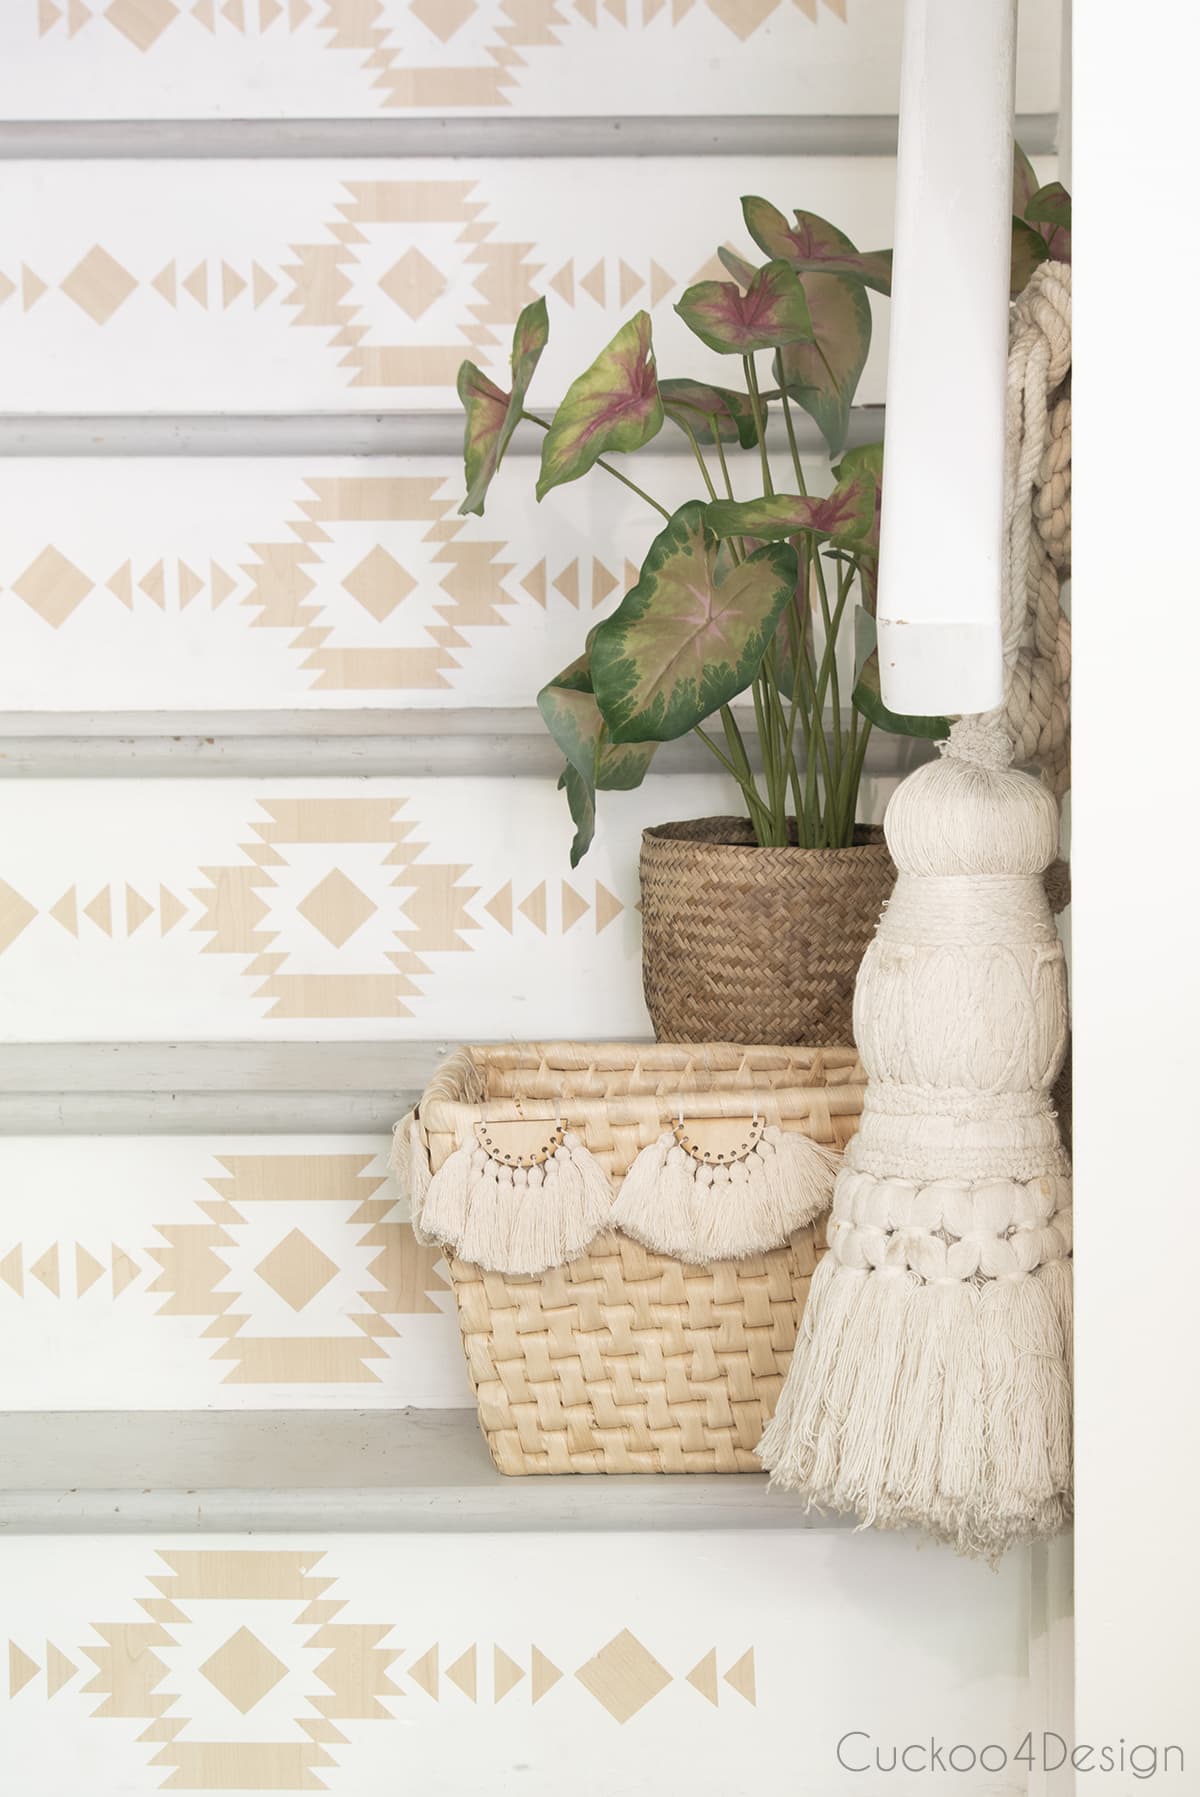 view of stairs with Aztec stair decals